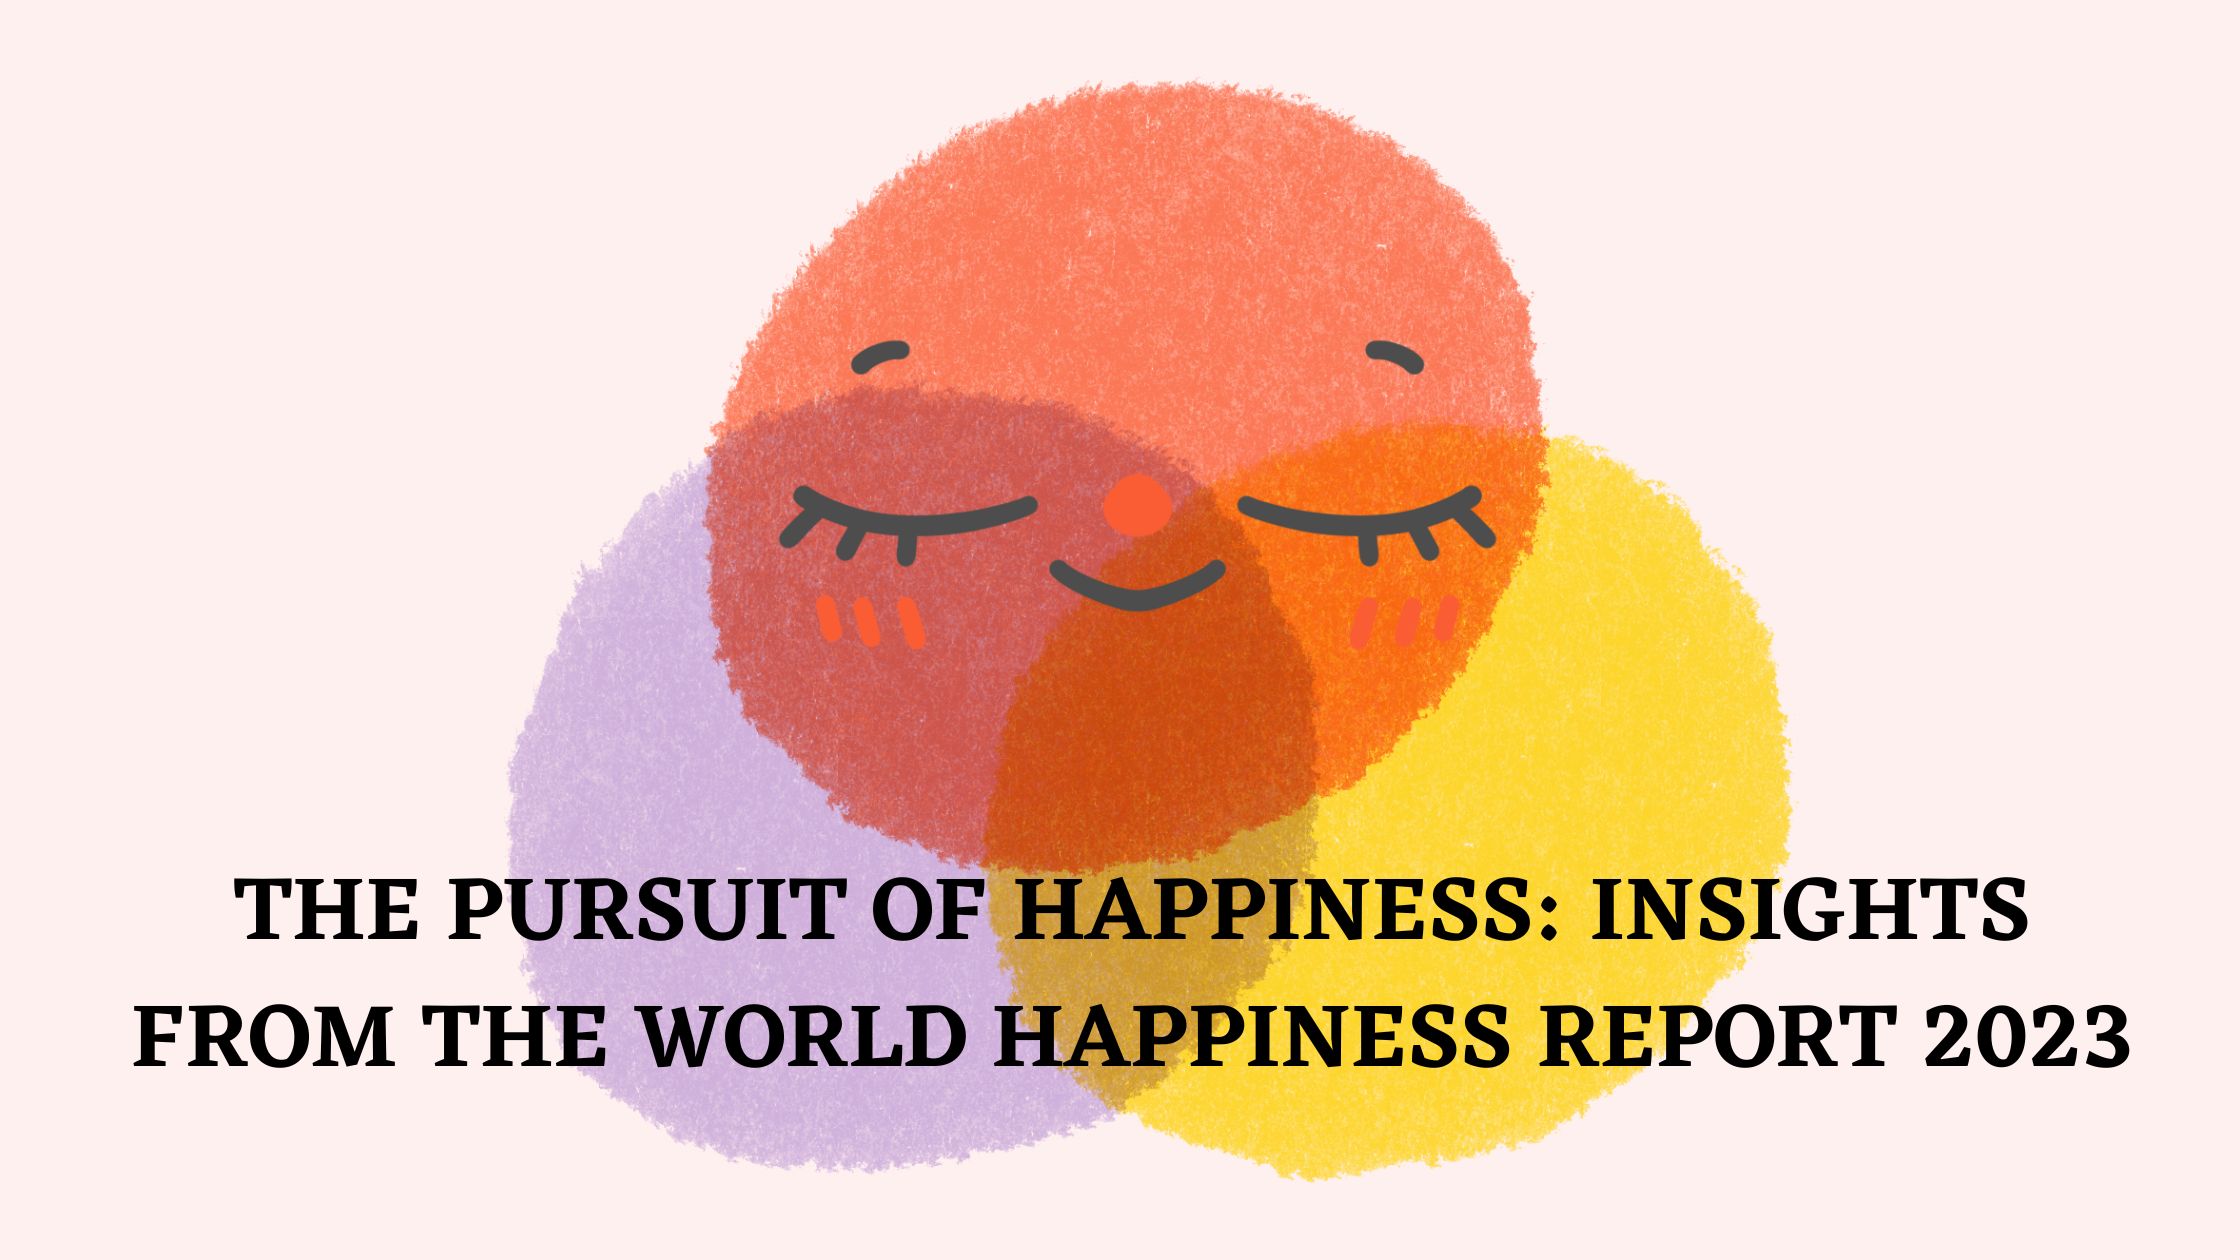 The Pursuit of Happiness: Insights from the World Happiness Report 2023